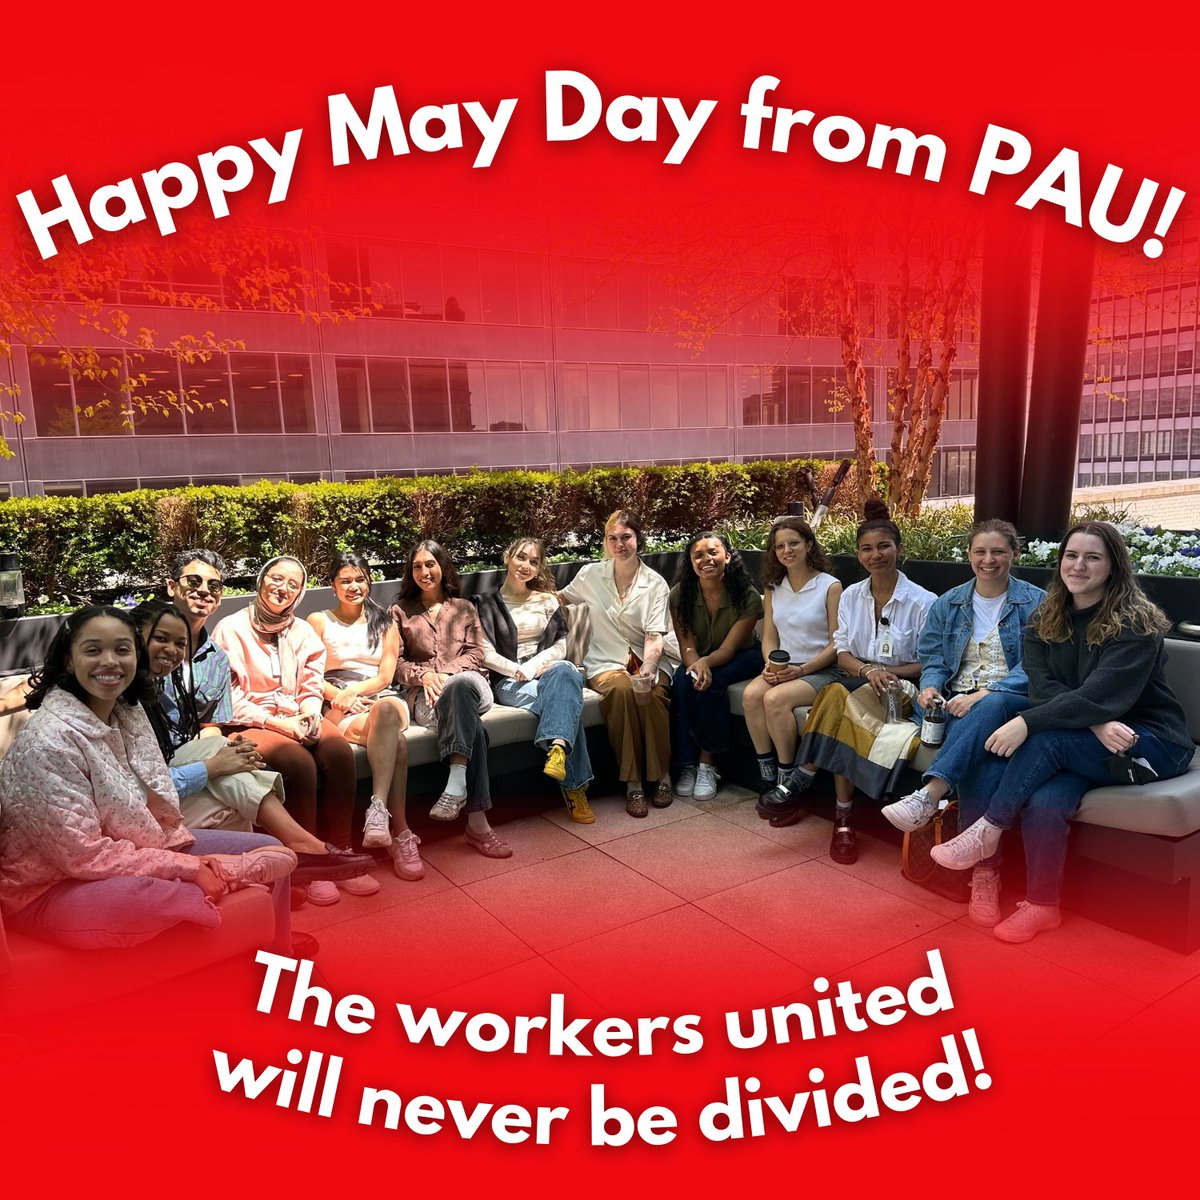 This May Day, PAU recognizes the importance of organized labor and the labor of our union members. We continue our fight for a fair contract now!!